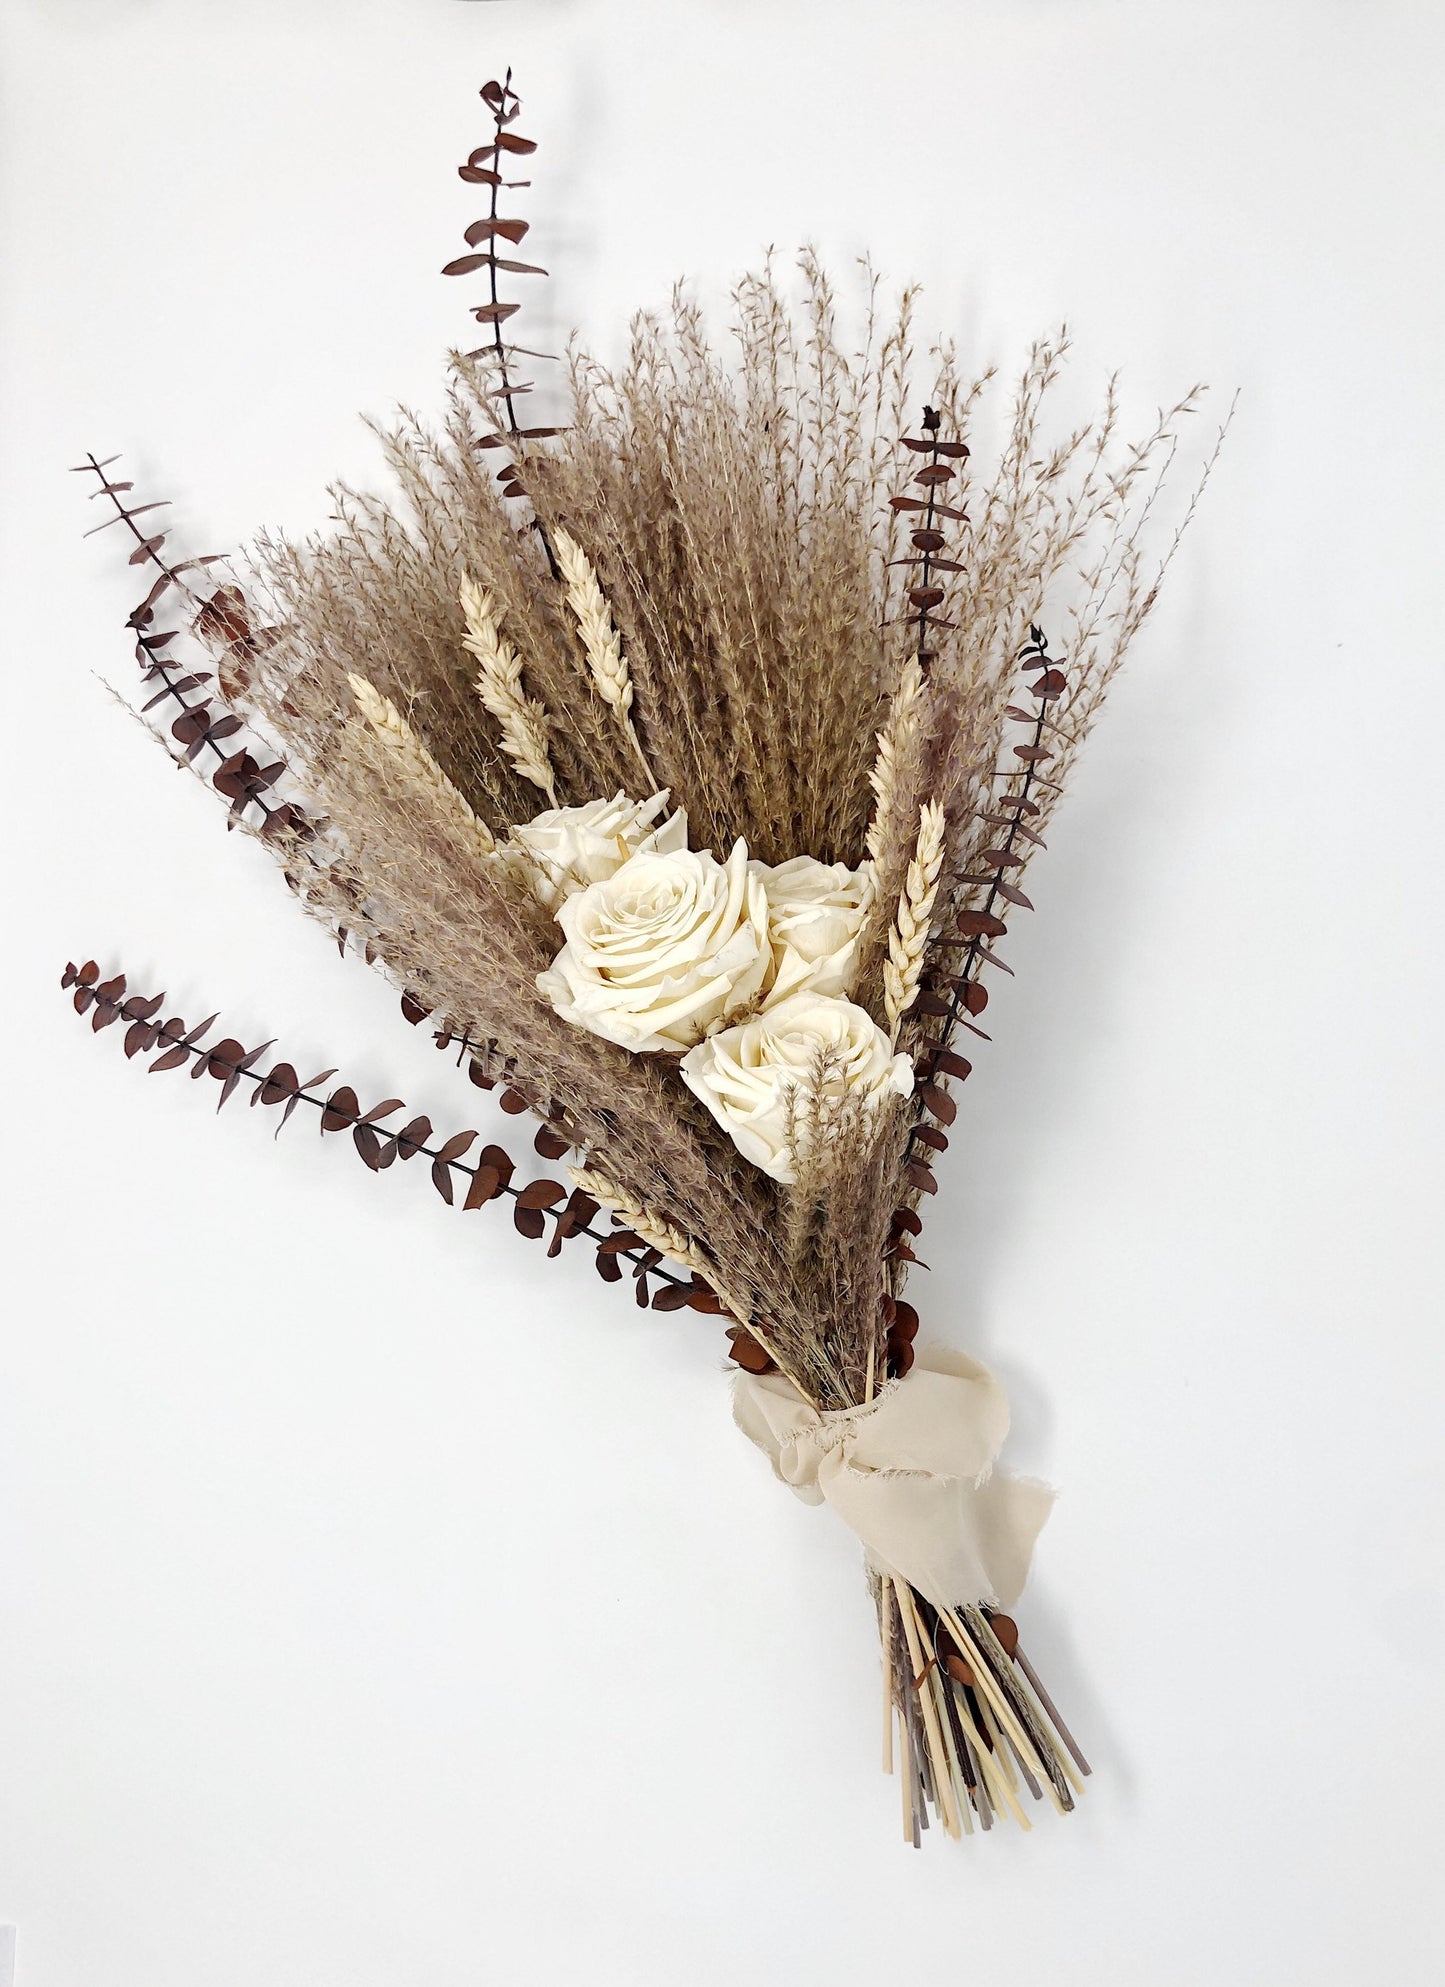 Off White Wedding Bouquet, Preserved Forever Roses, Floral, Beige, Bridal, Fall, Pampas Grass, Ribbon, Wheat, Cream and Green, Neutral Dried